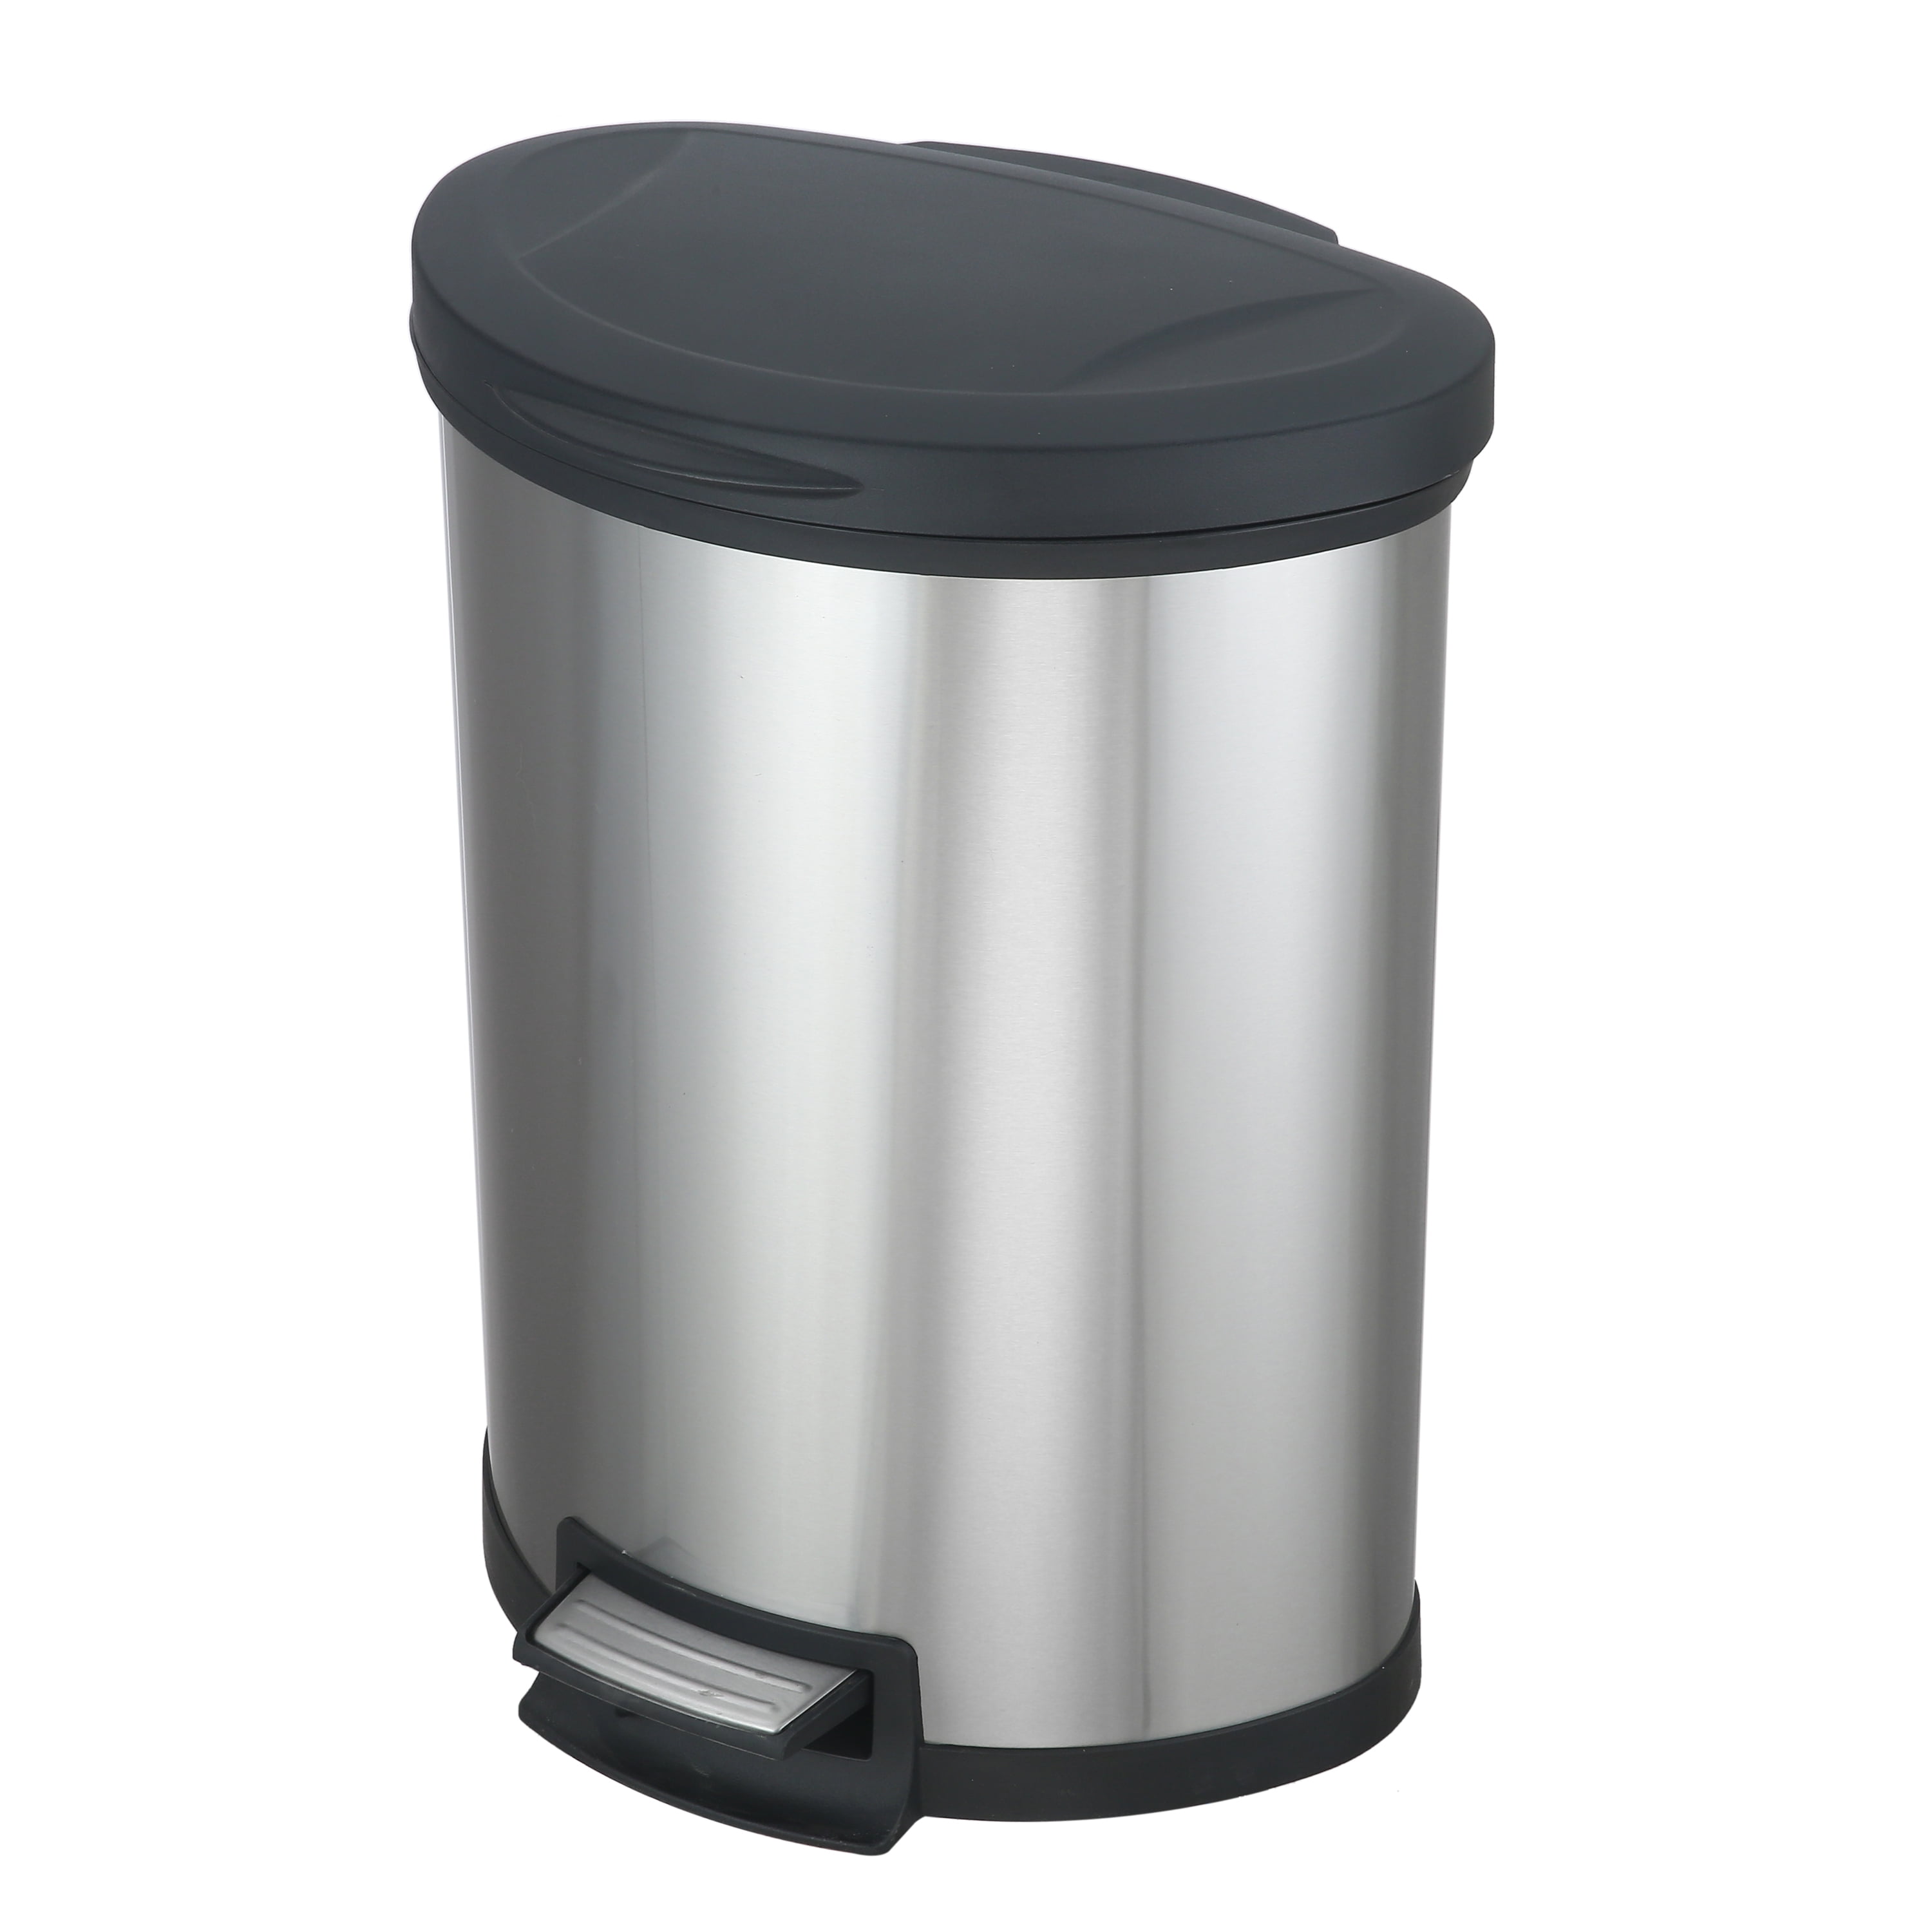 Mainstays 13 gal Plastic Swing Top Lid Kitchen Trash Garbage Can, Gray 